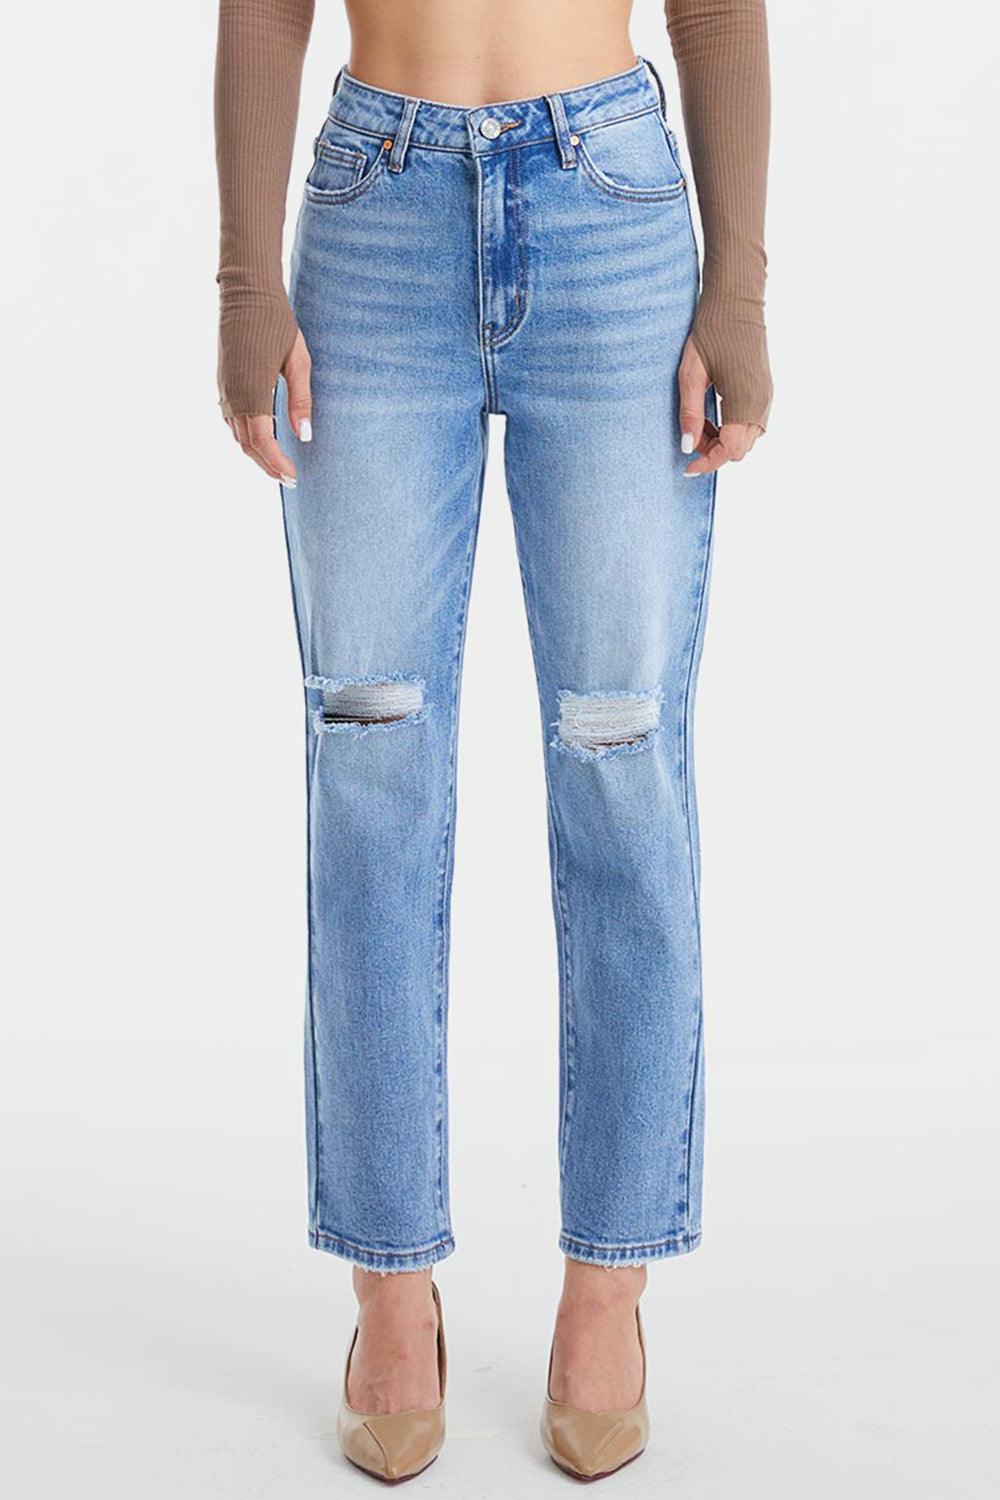 BAYEAS High Waist Distressed Cat's Whiskers Washed Straight Jeans - Lucianne Boutique